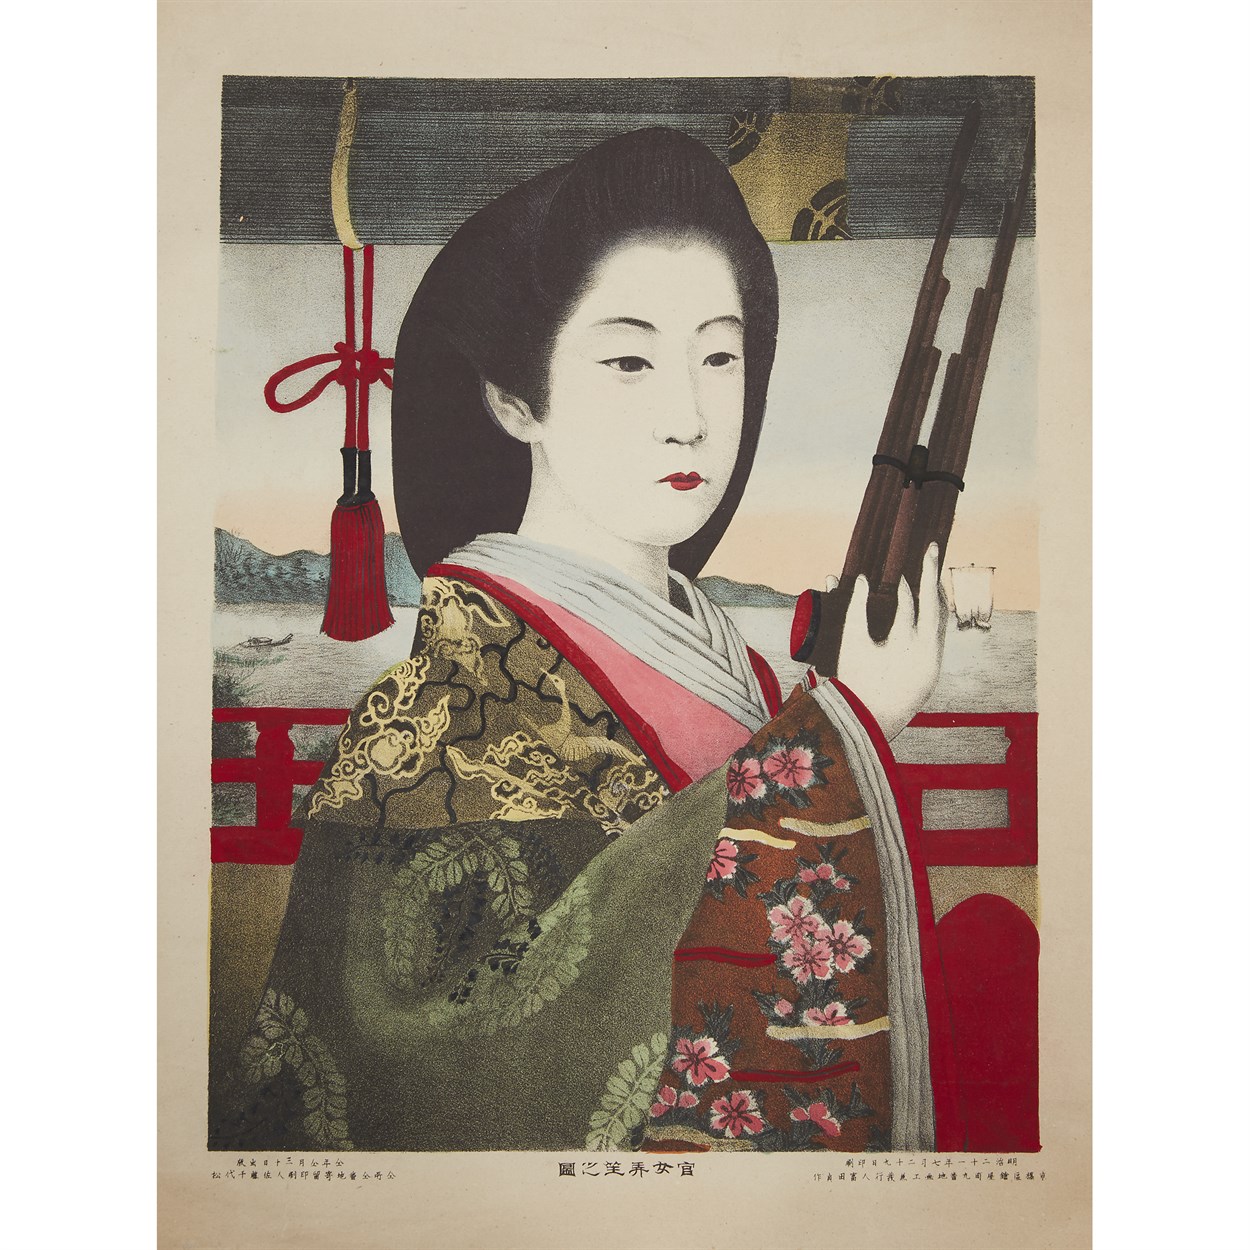 Lot 31 - An interesting collection of Japanese woodblock prints and handcolored prints